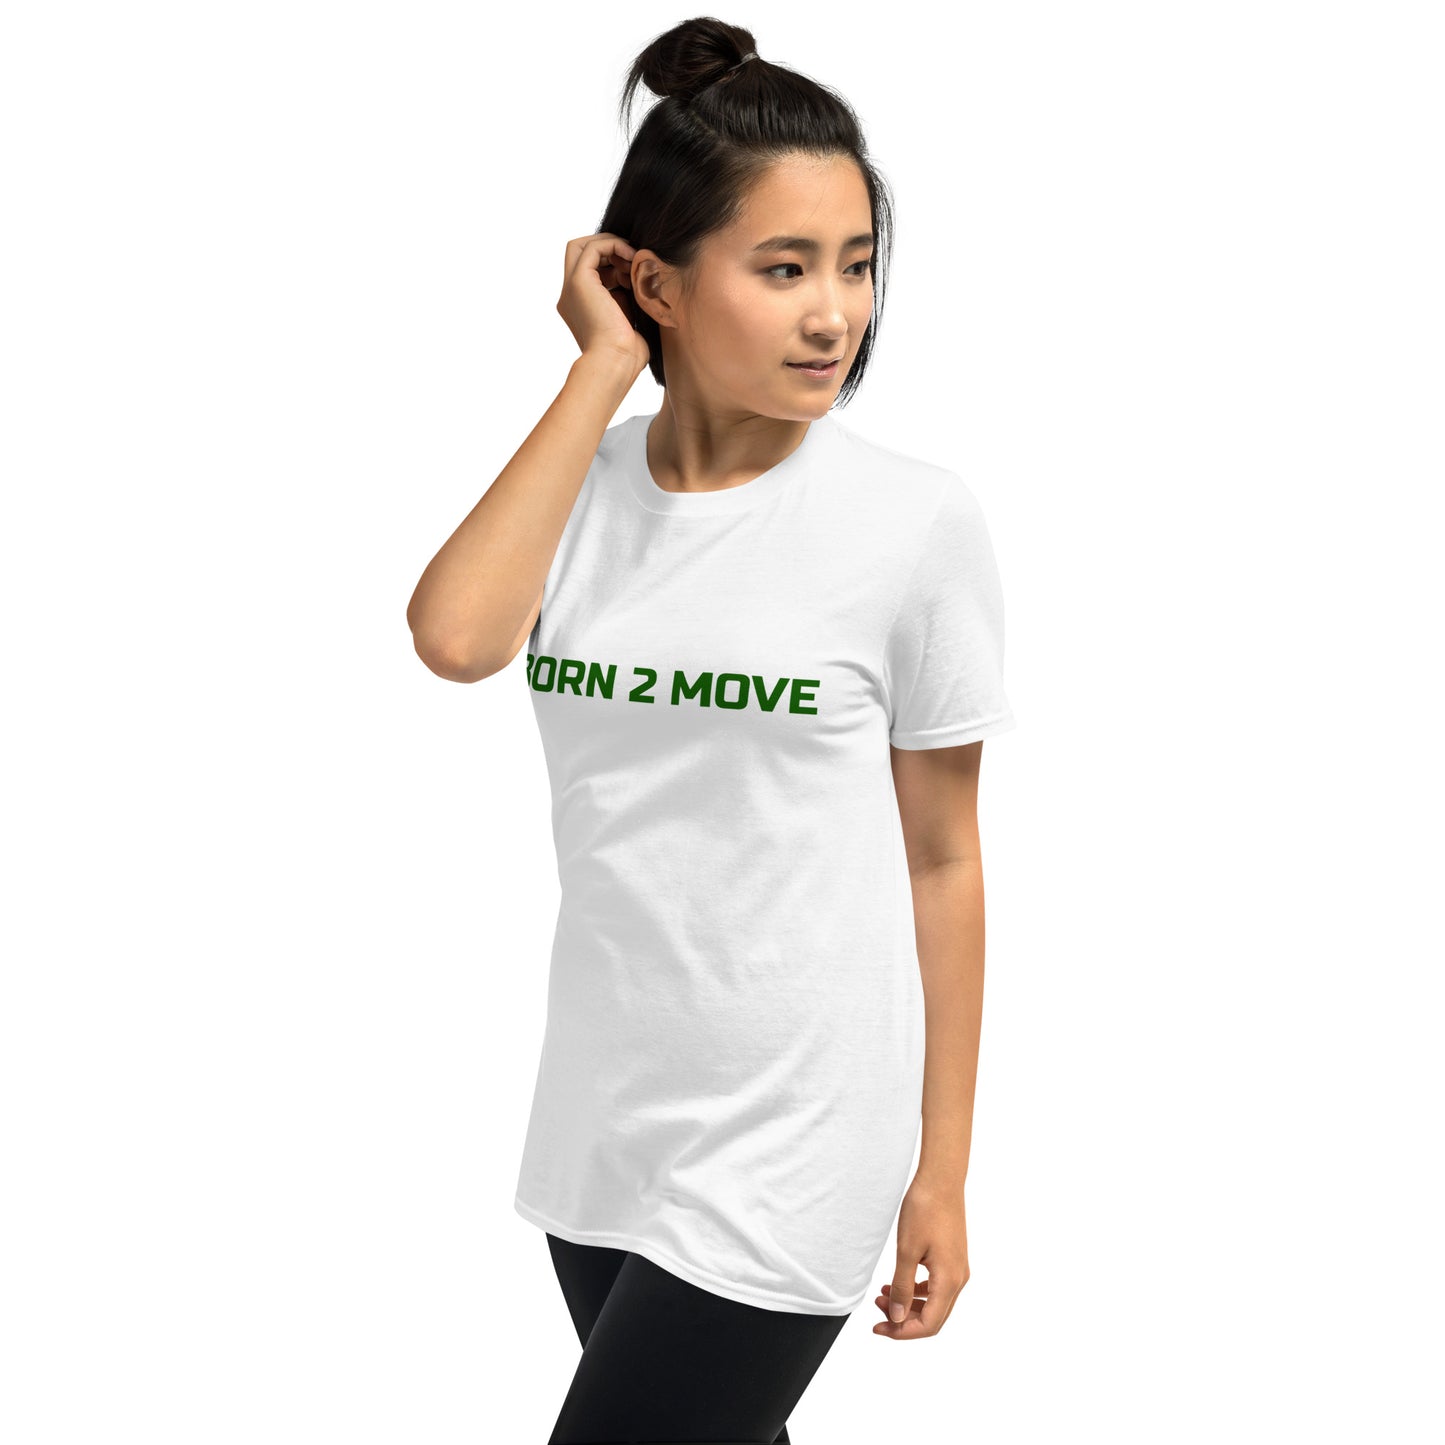 Gold" Born 2 Move" Softstyle t-shirt